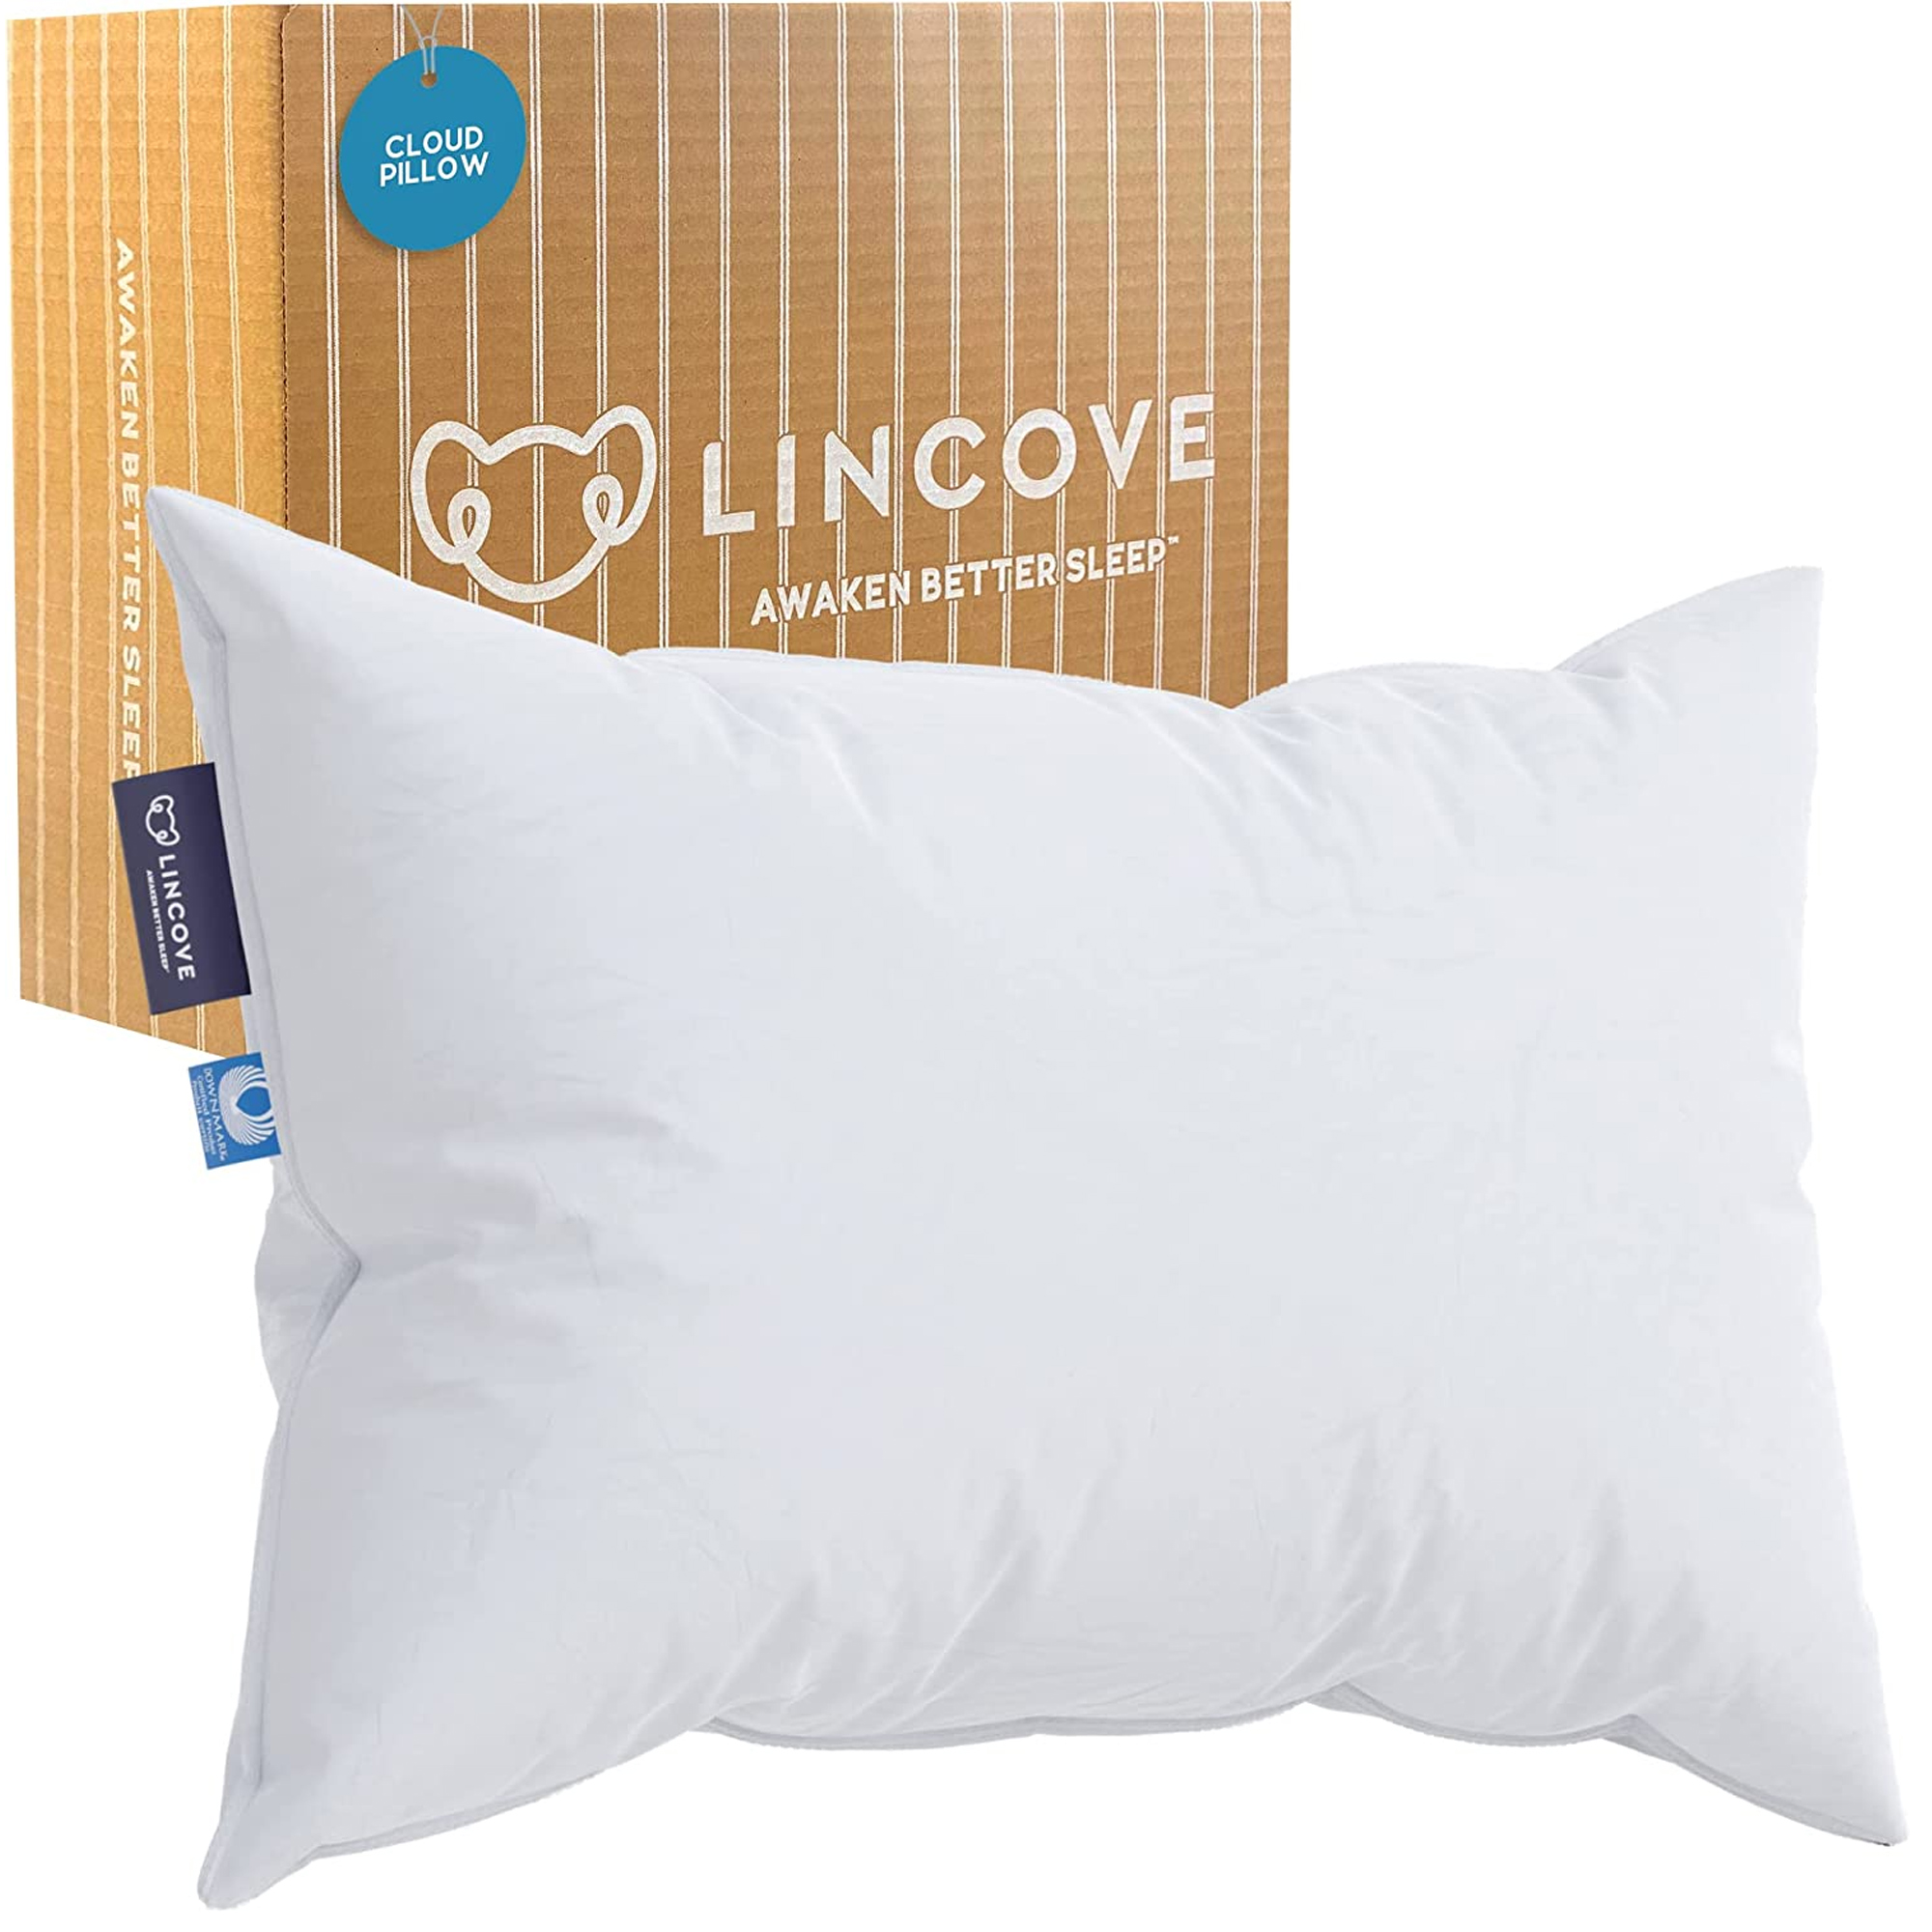 Lincove Cloud Canadian White Down Luxury Pillow Comfortable Pillows